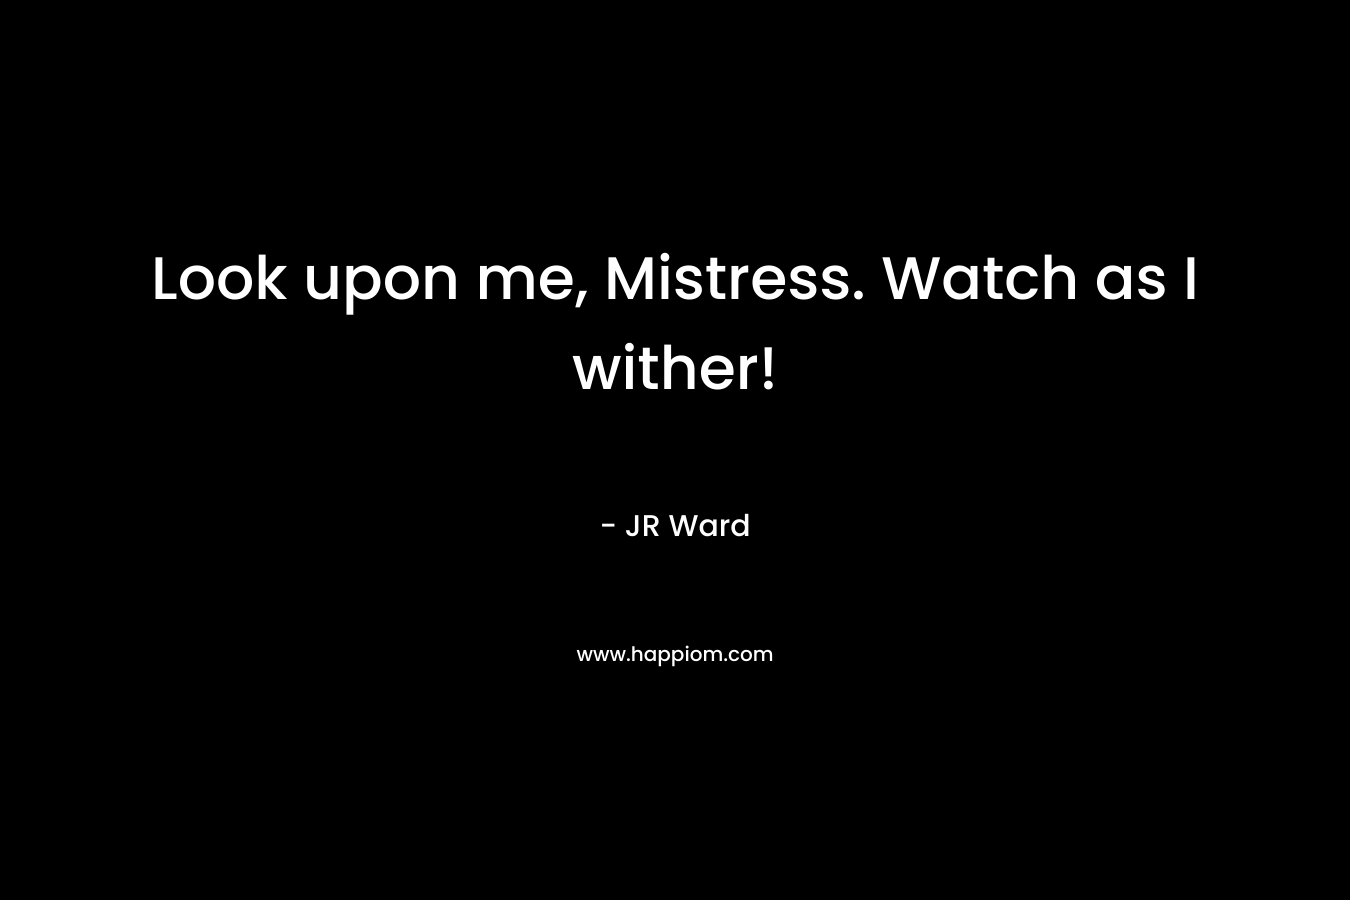 Look upon me, Mistress. Watch as I wither! – JR Ward